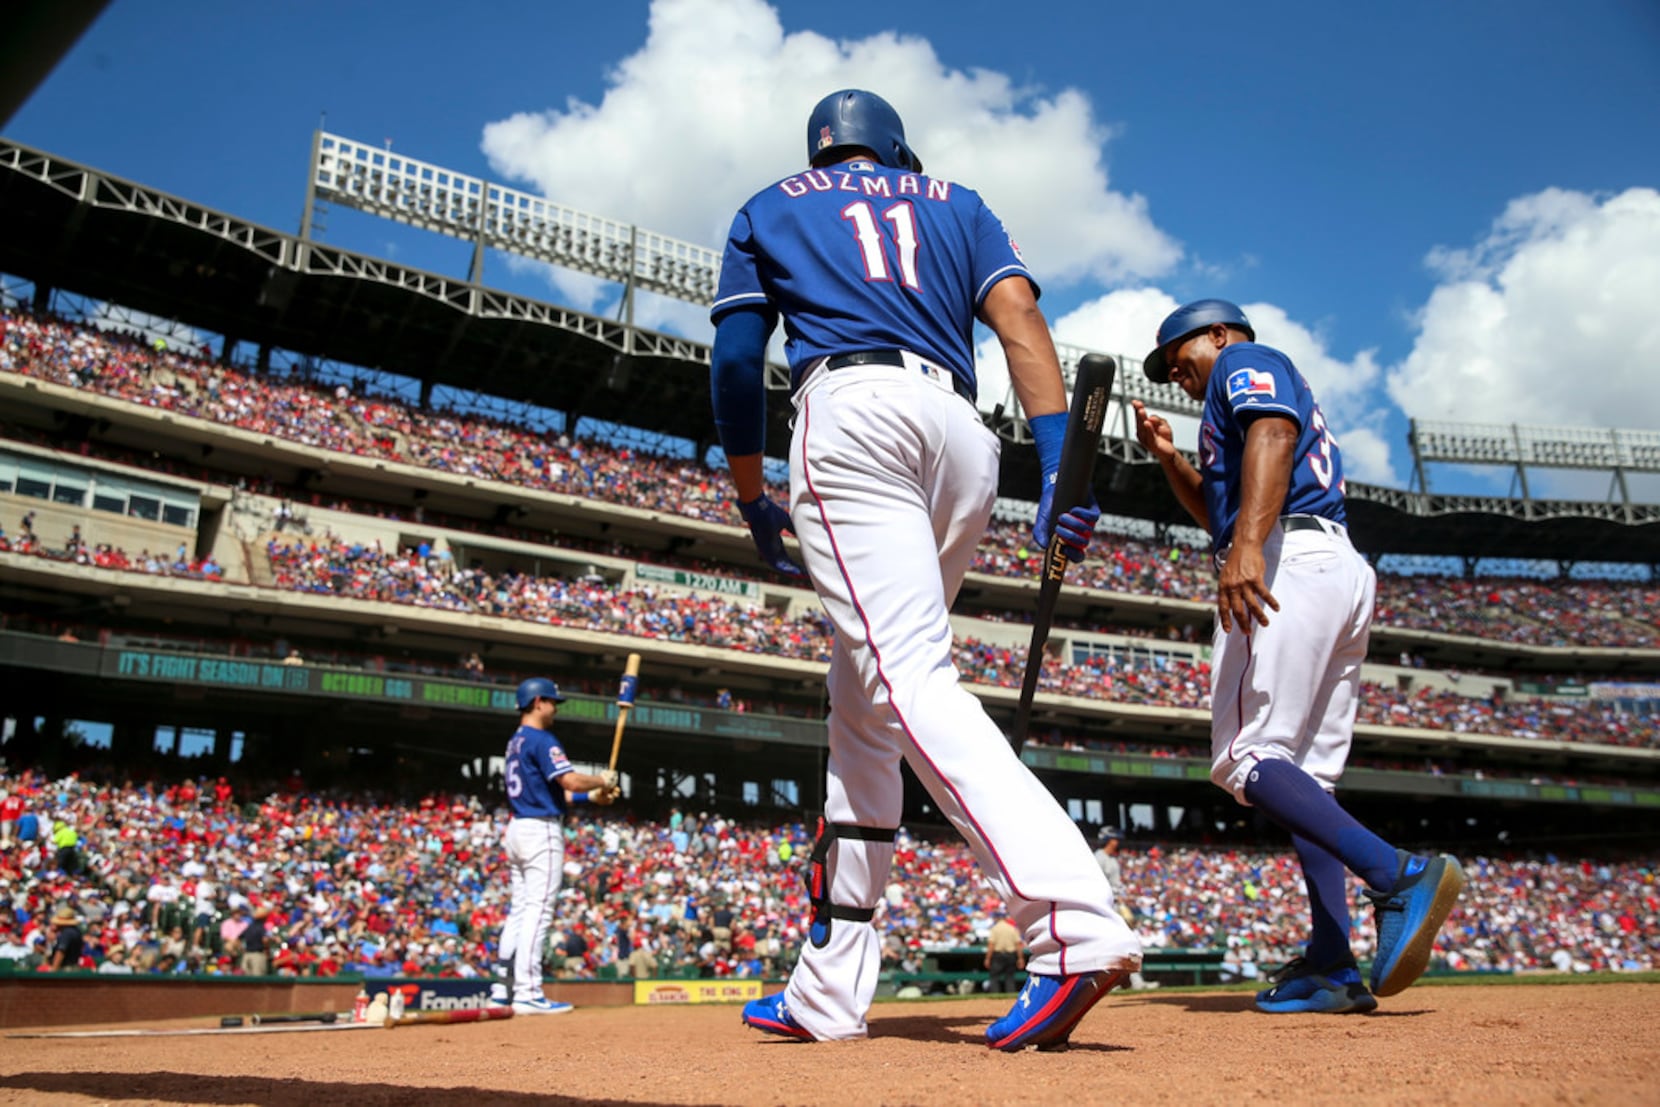 Globe Life Park - history, photos and more of the Texas Rangers